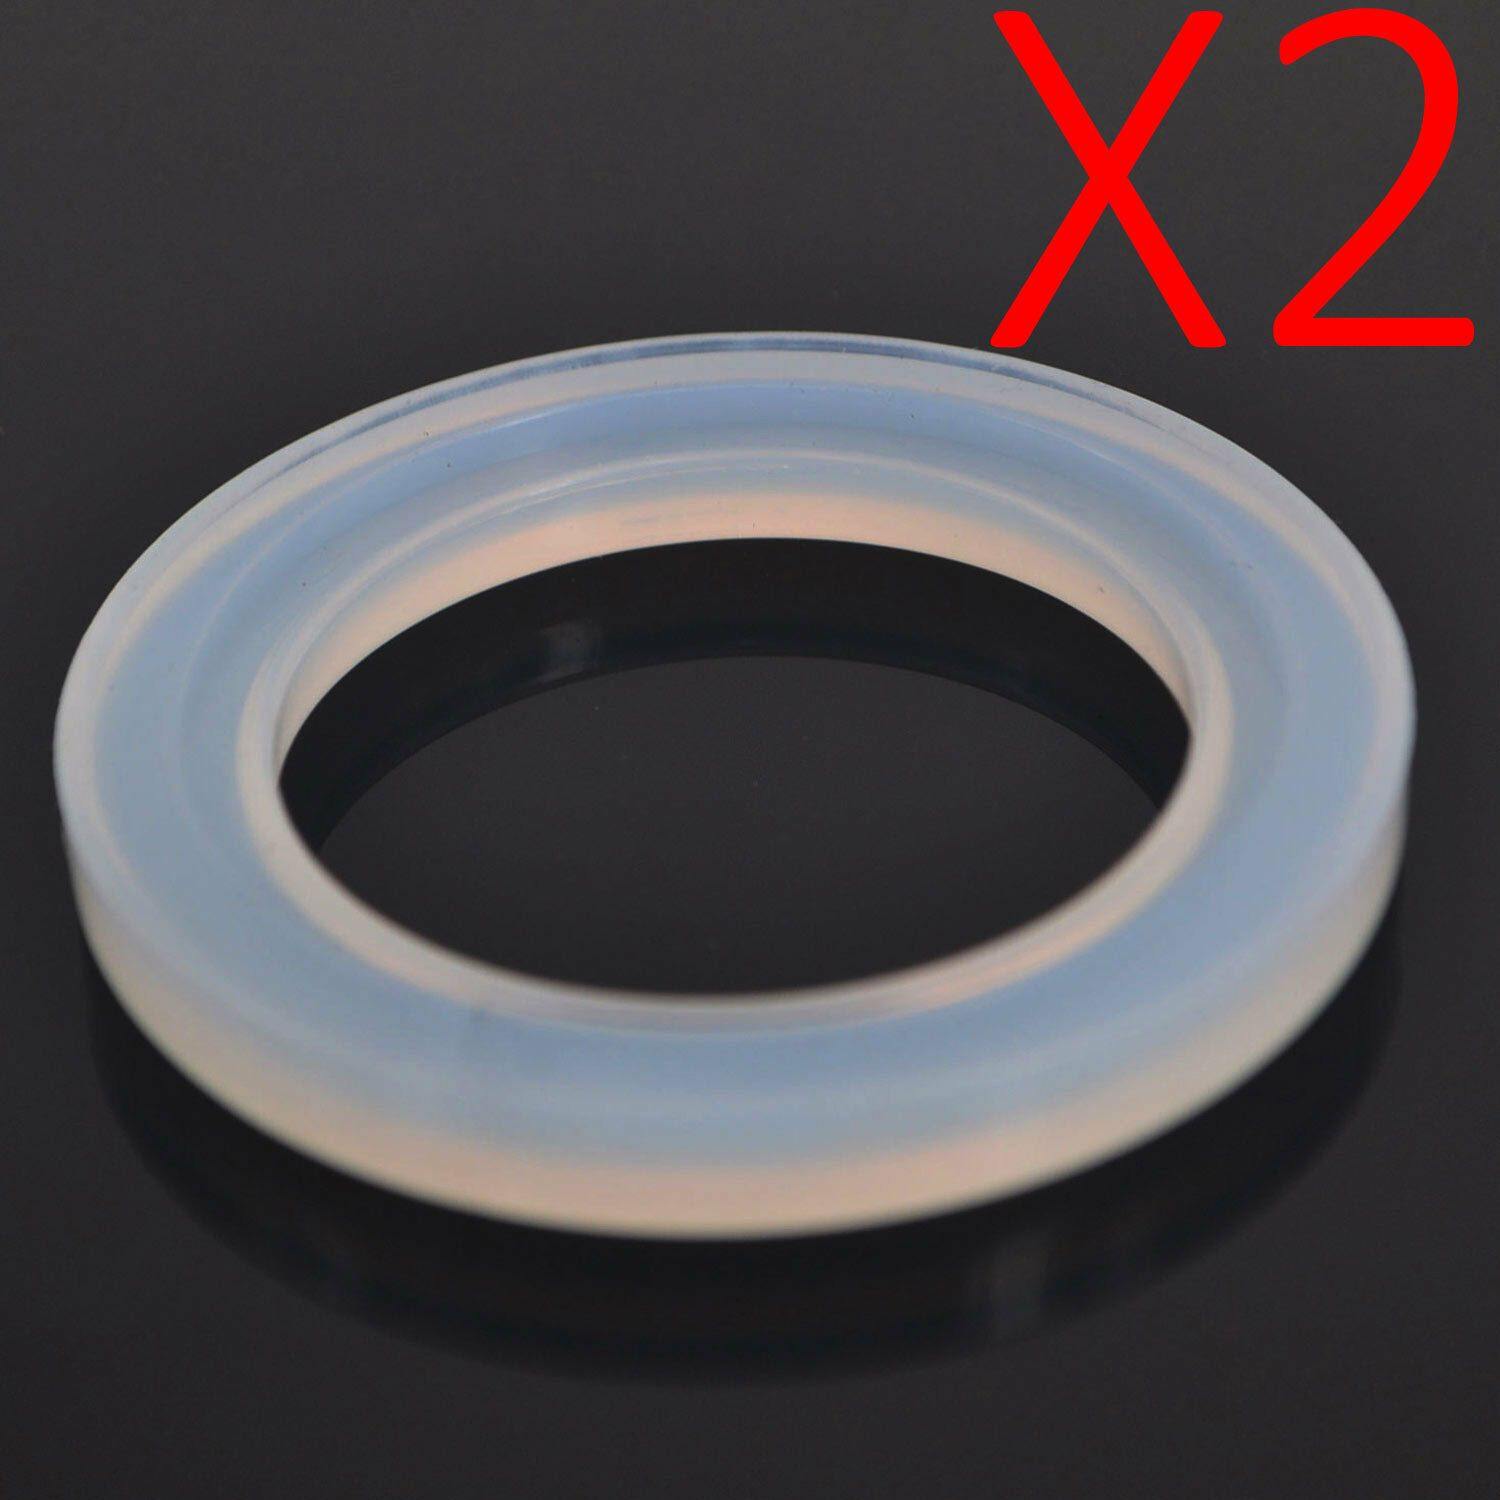 2X Brew Group Head Seal For Breville Espresso BES980XL SP0001635 Sparesbarn